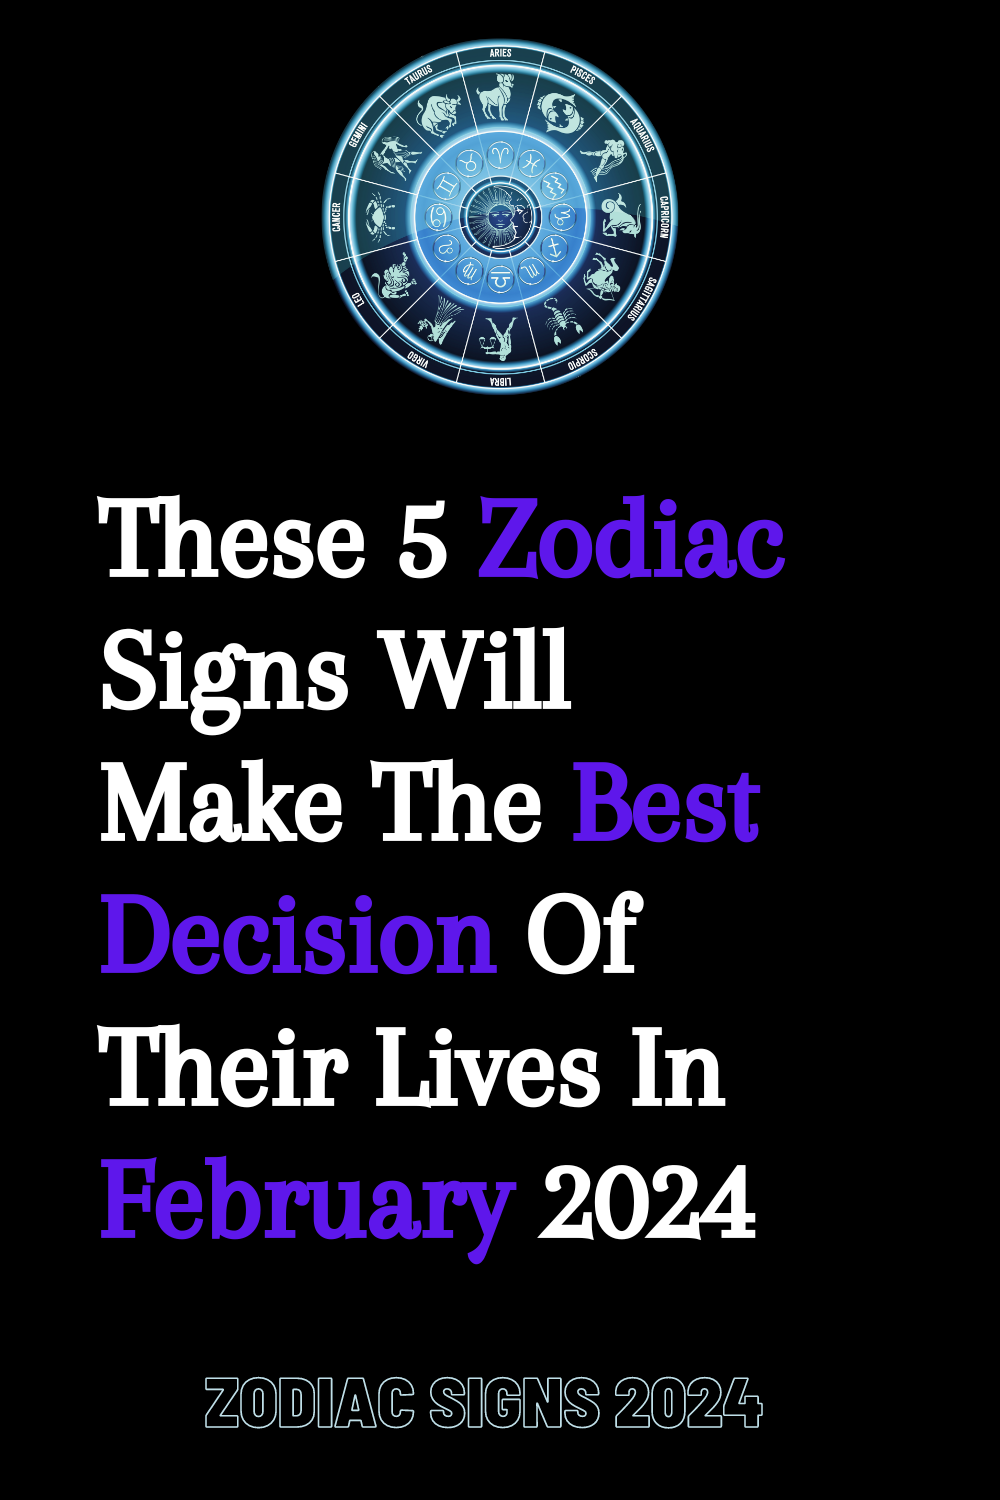 These 5 Zodiac Signs Will Make The Best Decision Of Their Lives In February 2024